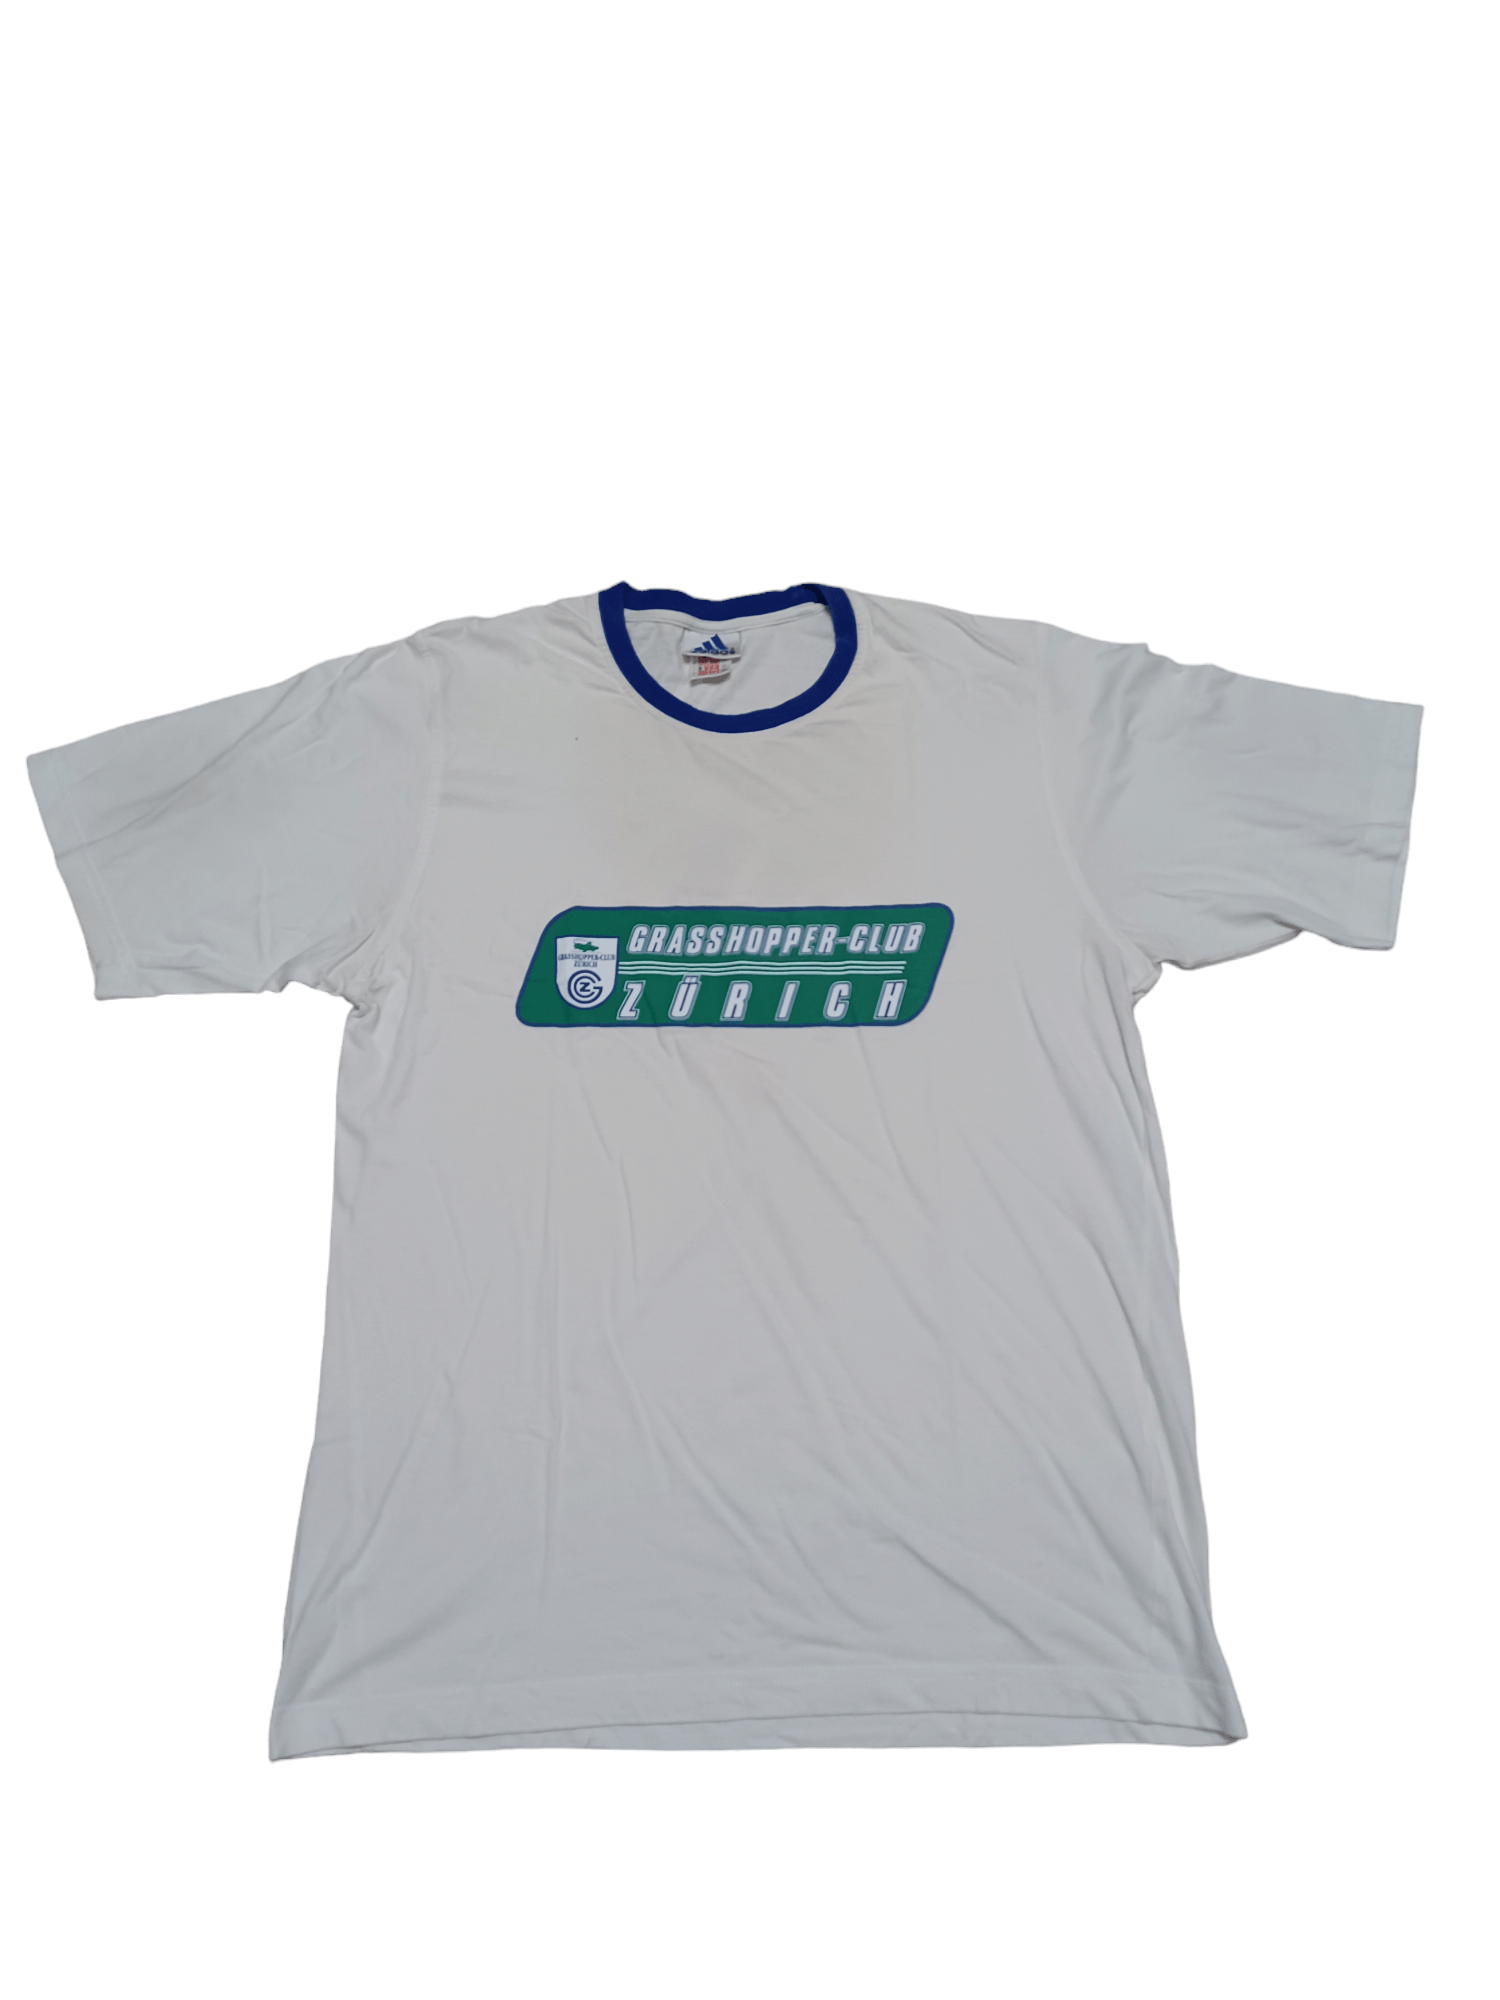 Pre-owned 1990x Clothing X Adidas Grasshopers Zurich Adidas Vintage 90's Soccer Tee Biglogo In White